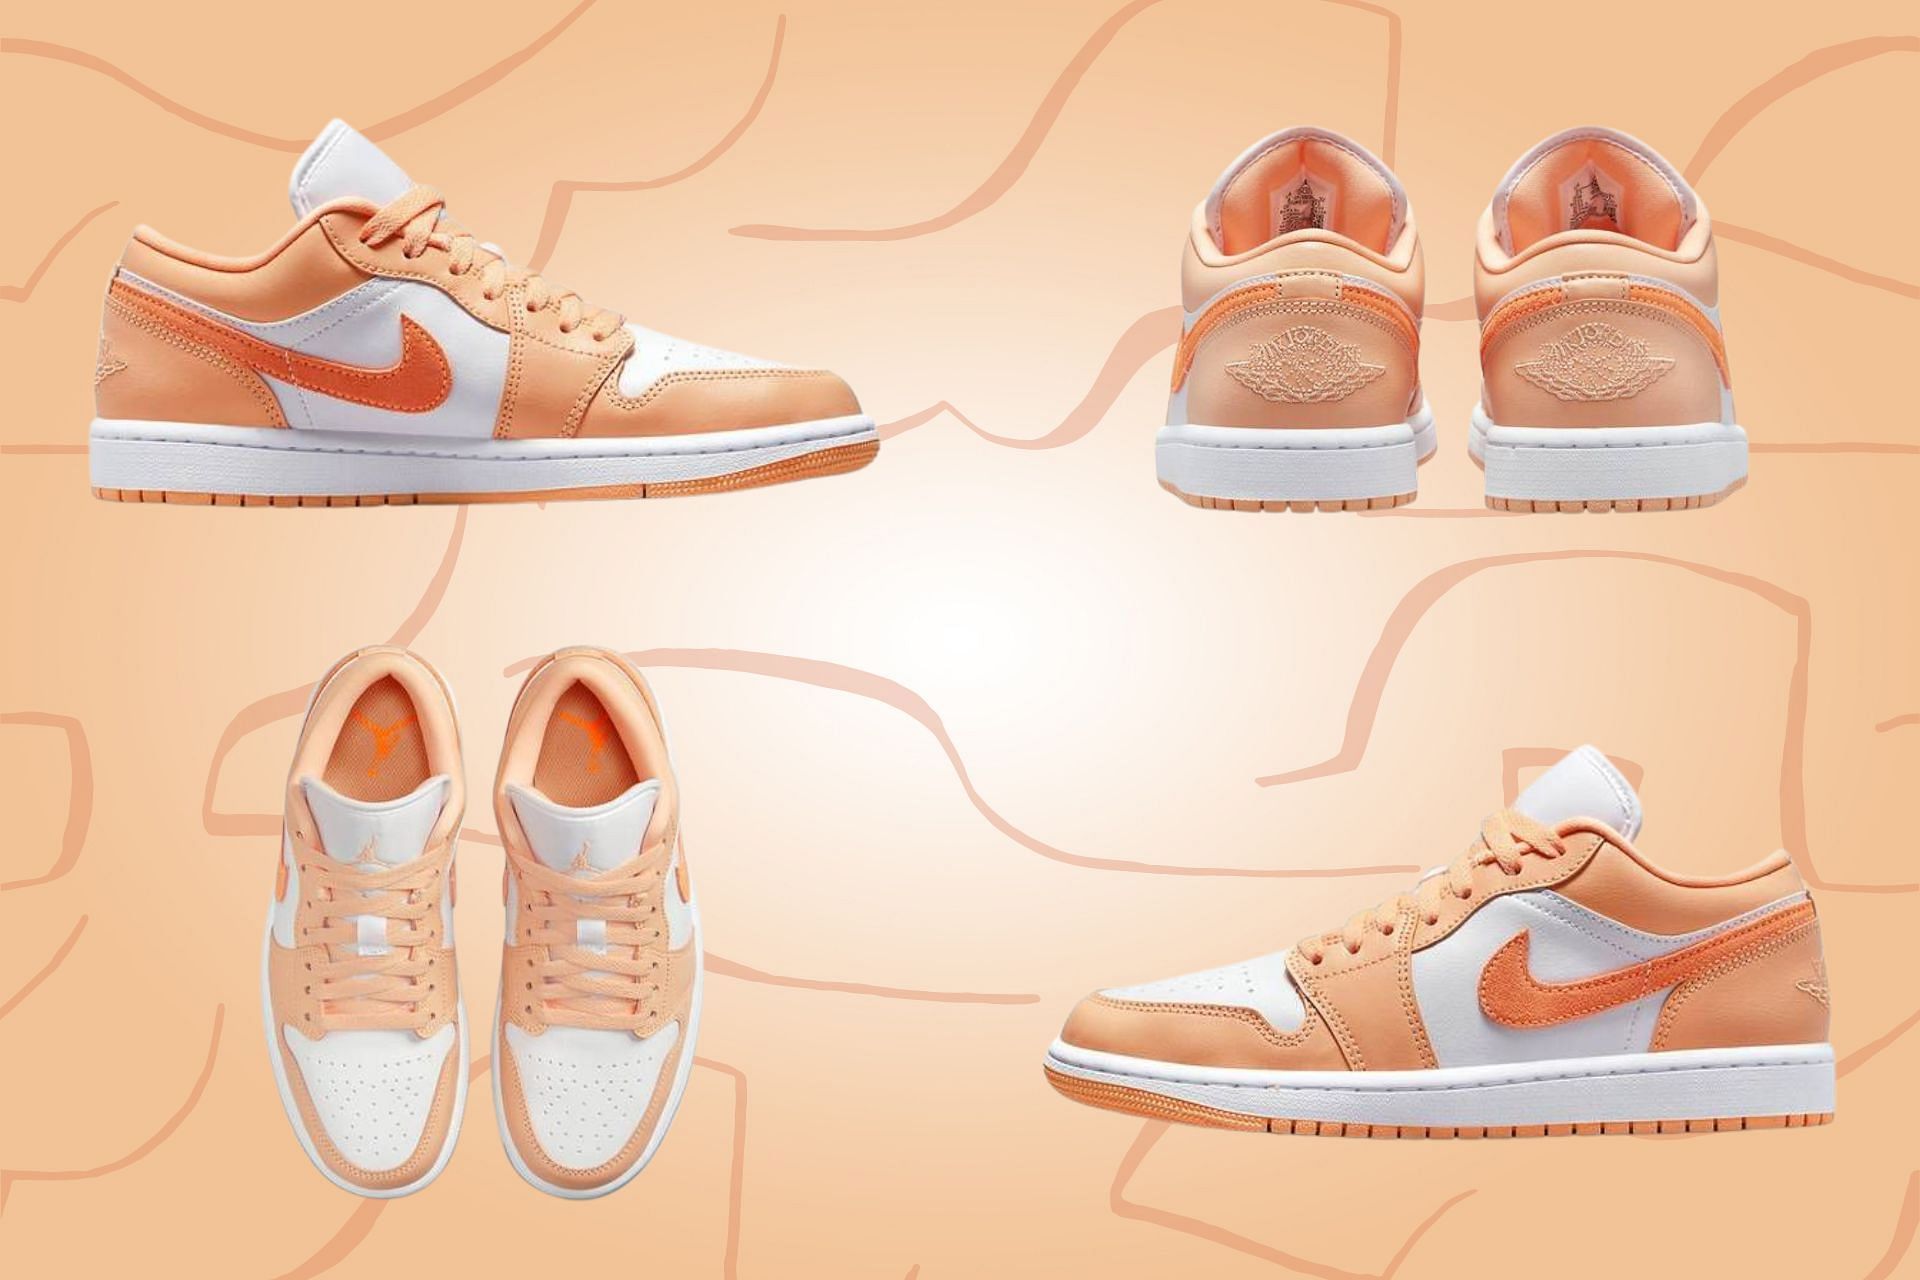 Here&#039;s a detailed look at the forthcoming Air Jordan 1 Low Sunset Haze shoes (Image via Sportskeeda)